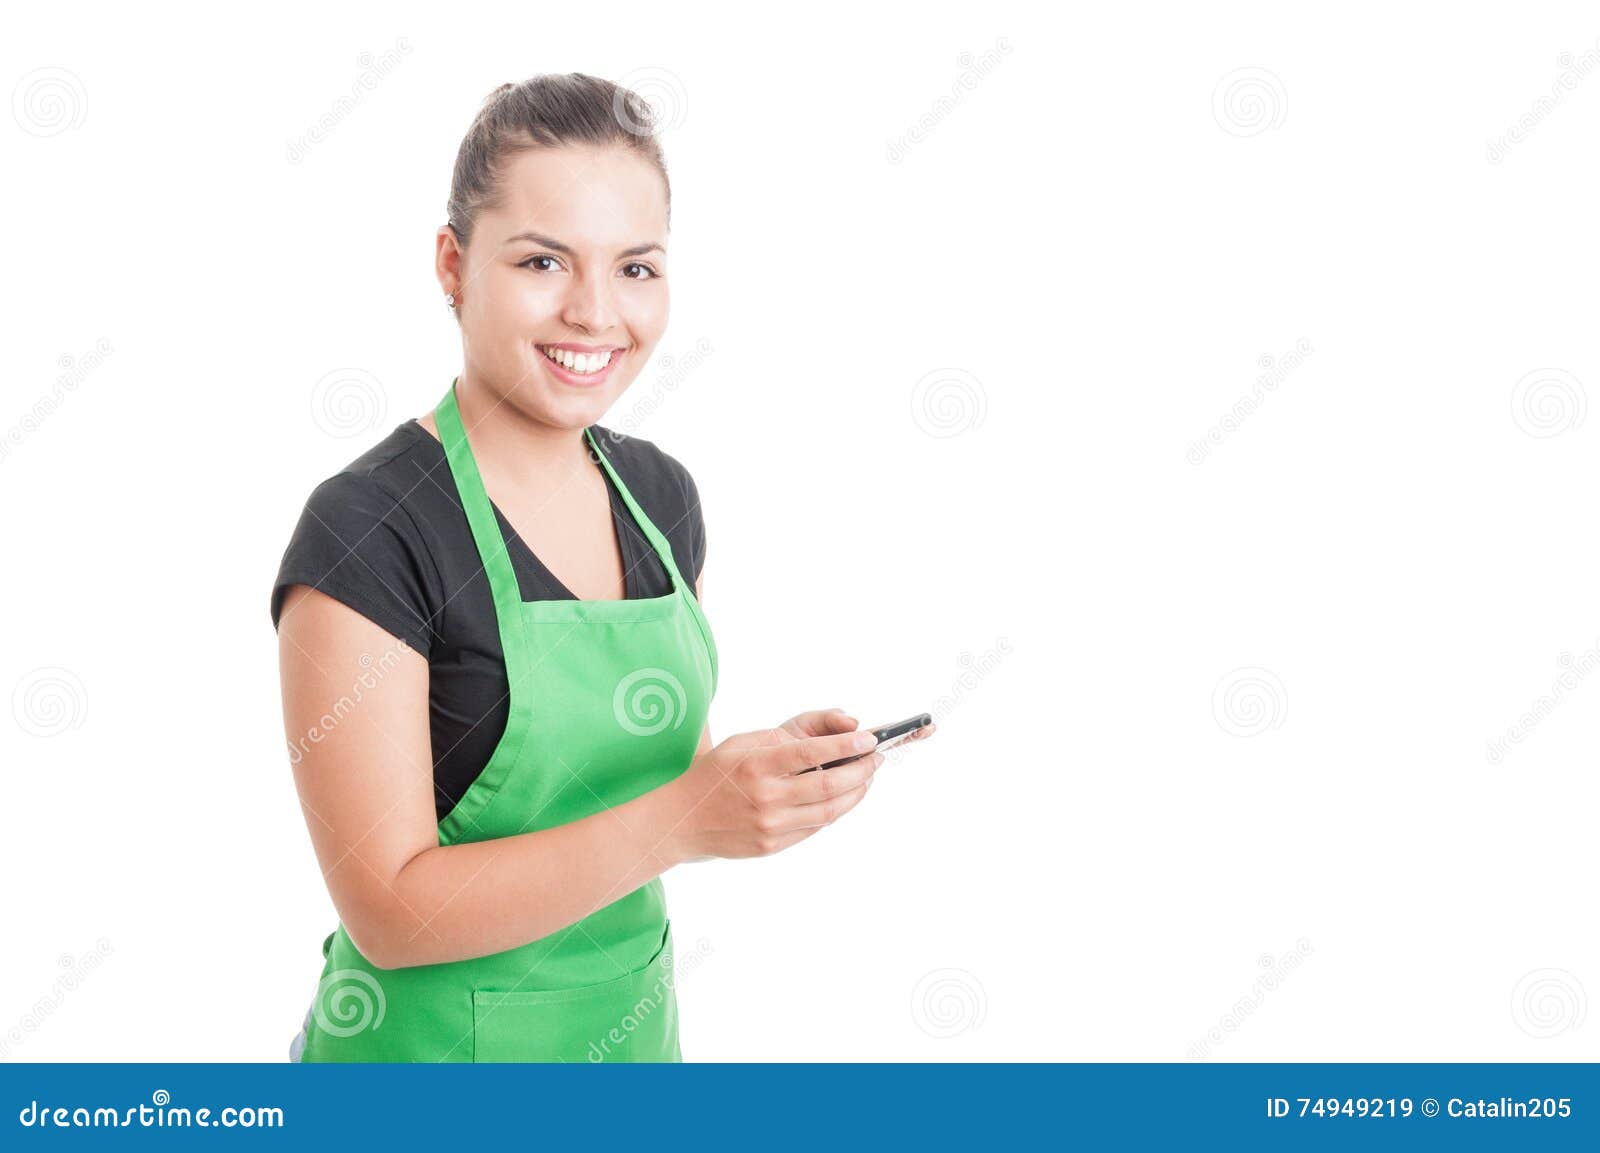 Smiling hypermarket employee reading something funny on mobile phone isolated on white background with text area